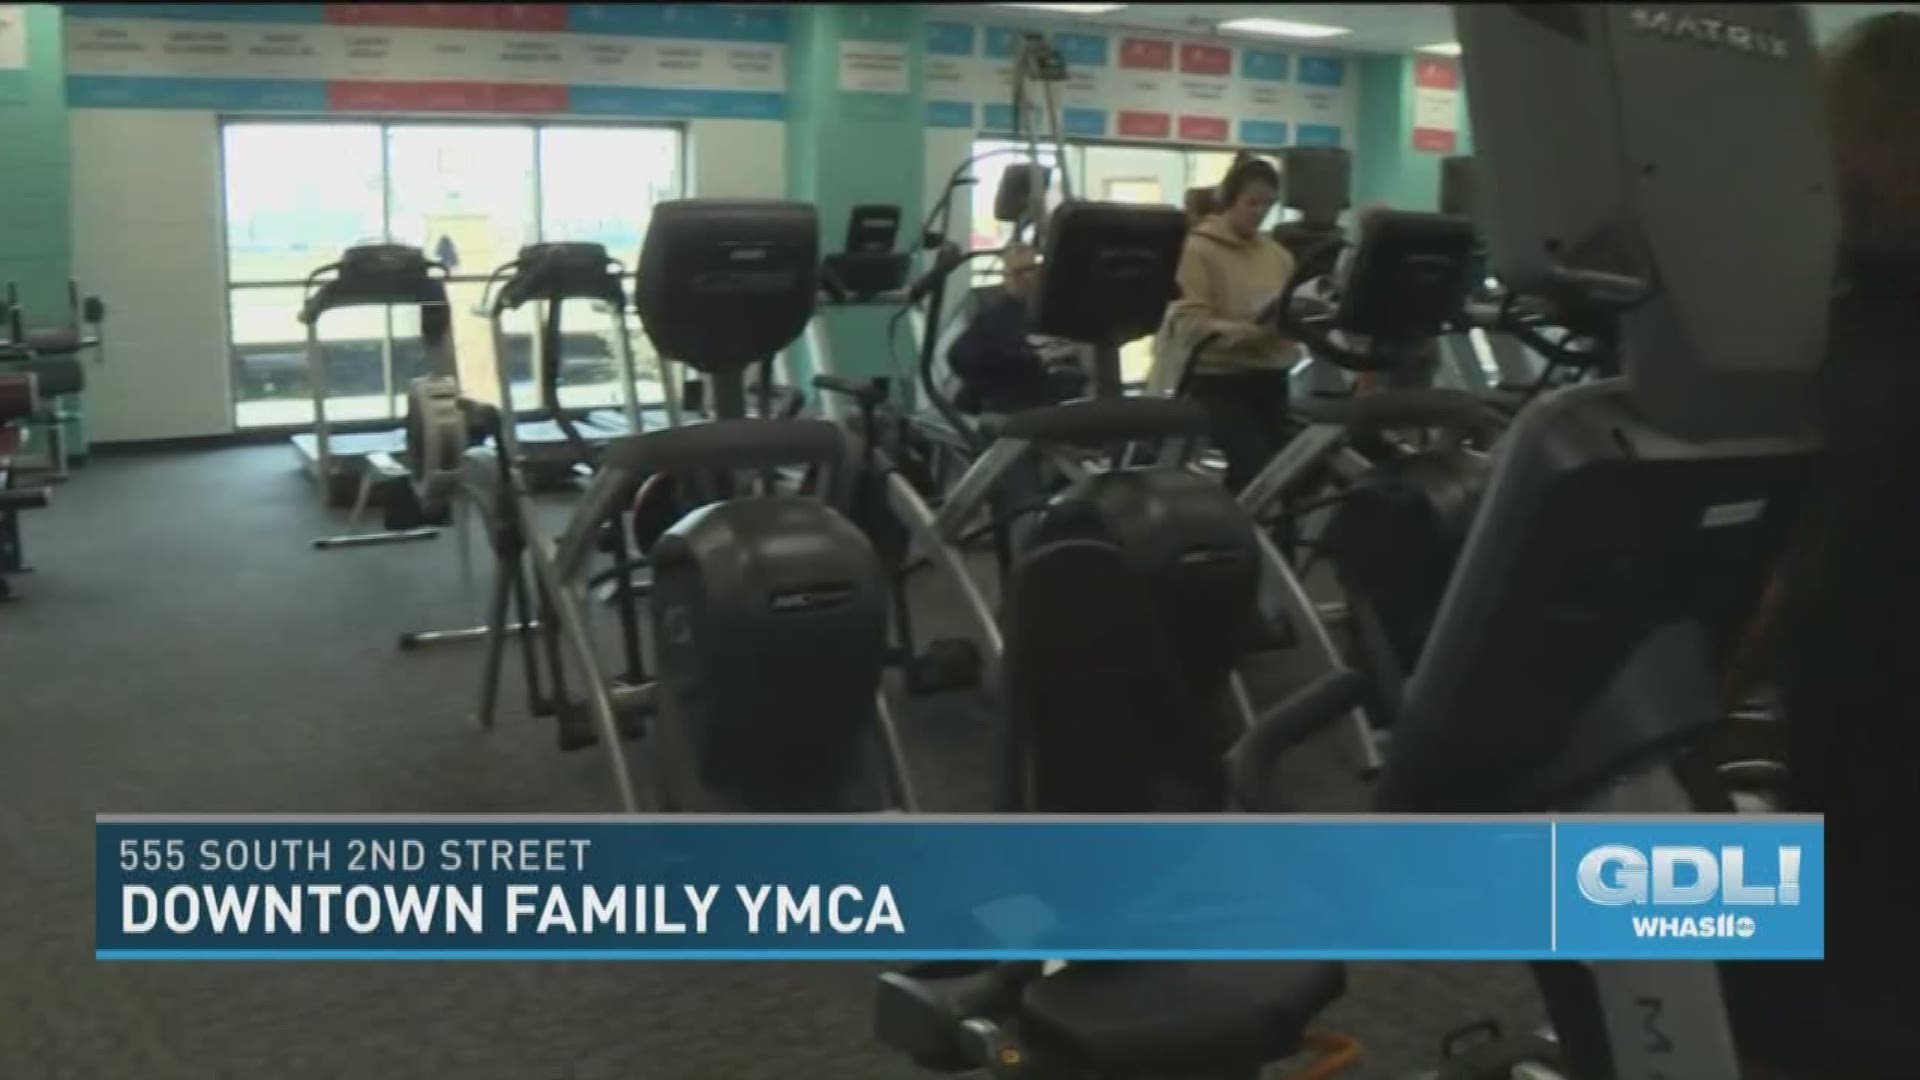 The YMCA is a place that has something to help everyone in the family stay healthy.